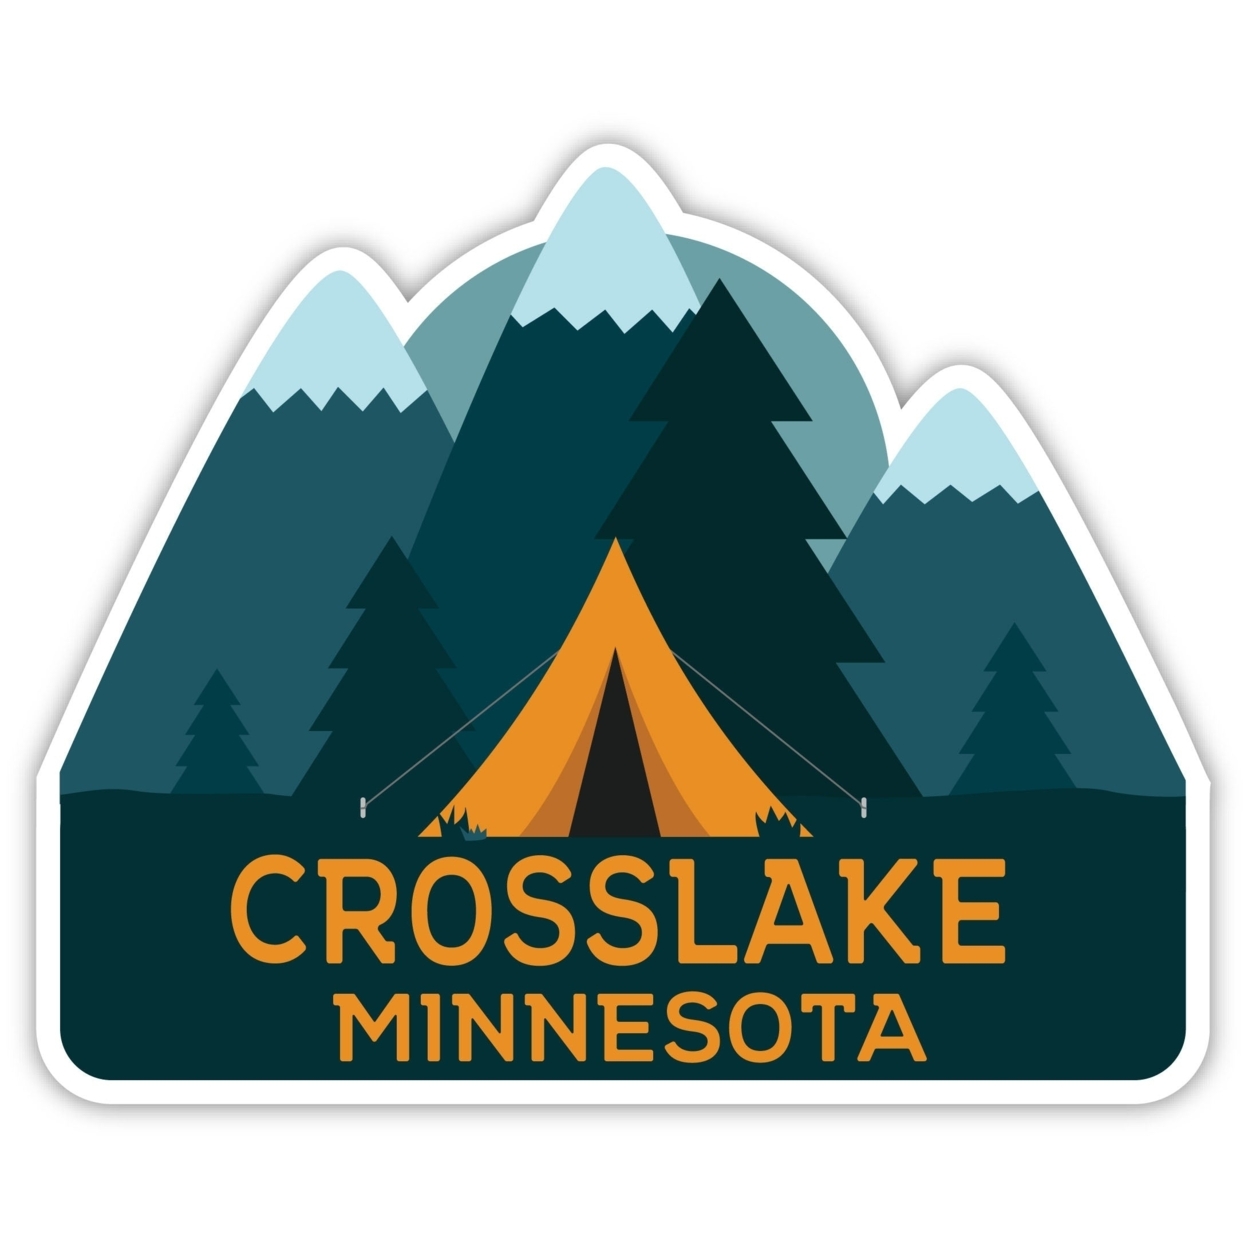 Crosslake Minnesota Souvenir Decorative Stickers (Choose Theme And Size) - 4-Pack, 2-Inch, Tent